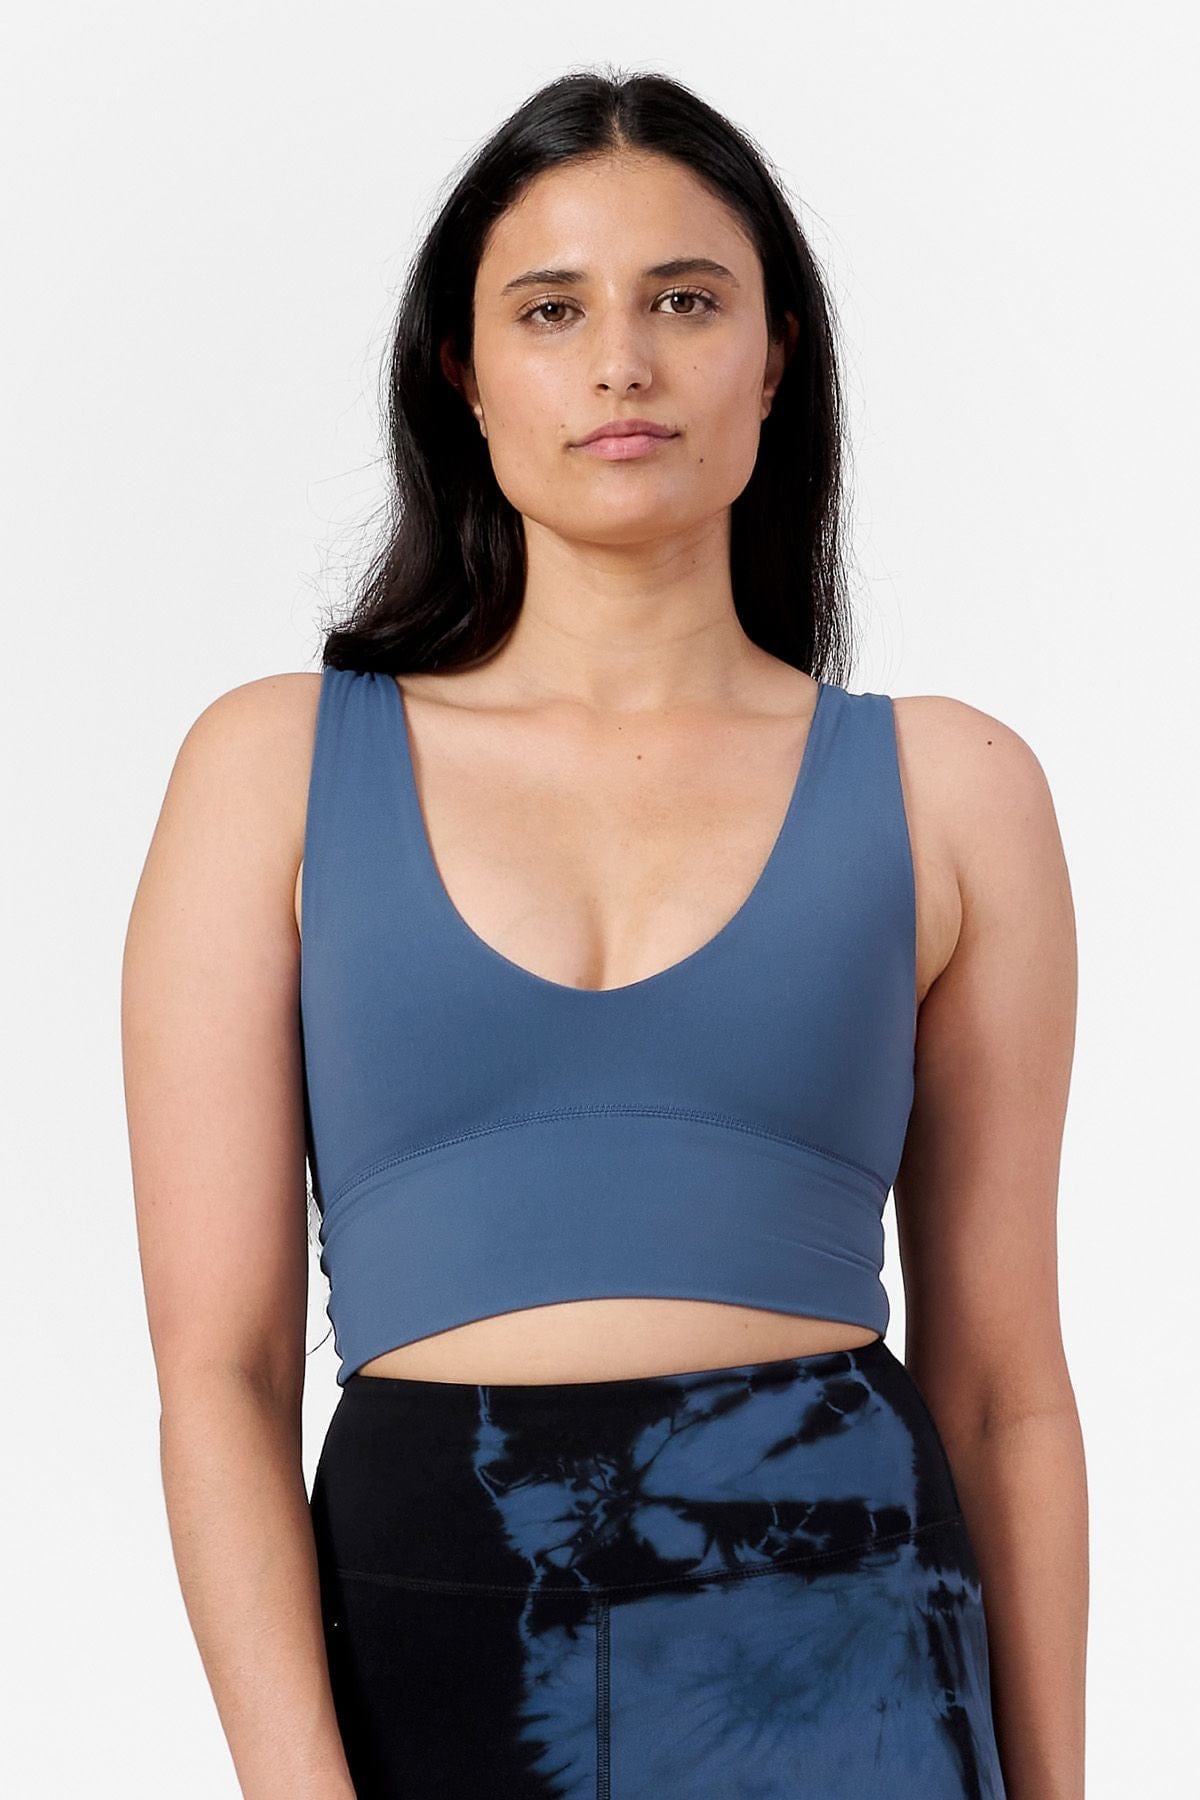 Sports Bras for Women Workout Yoga Tops with Built Kuwait